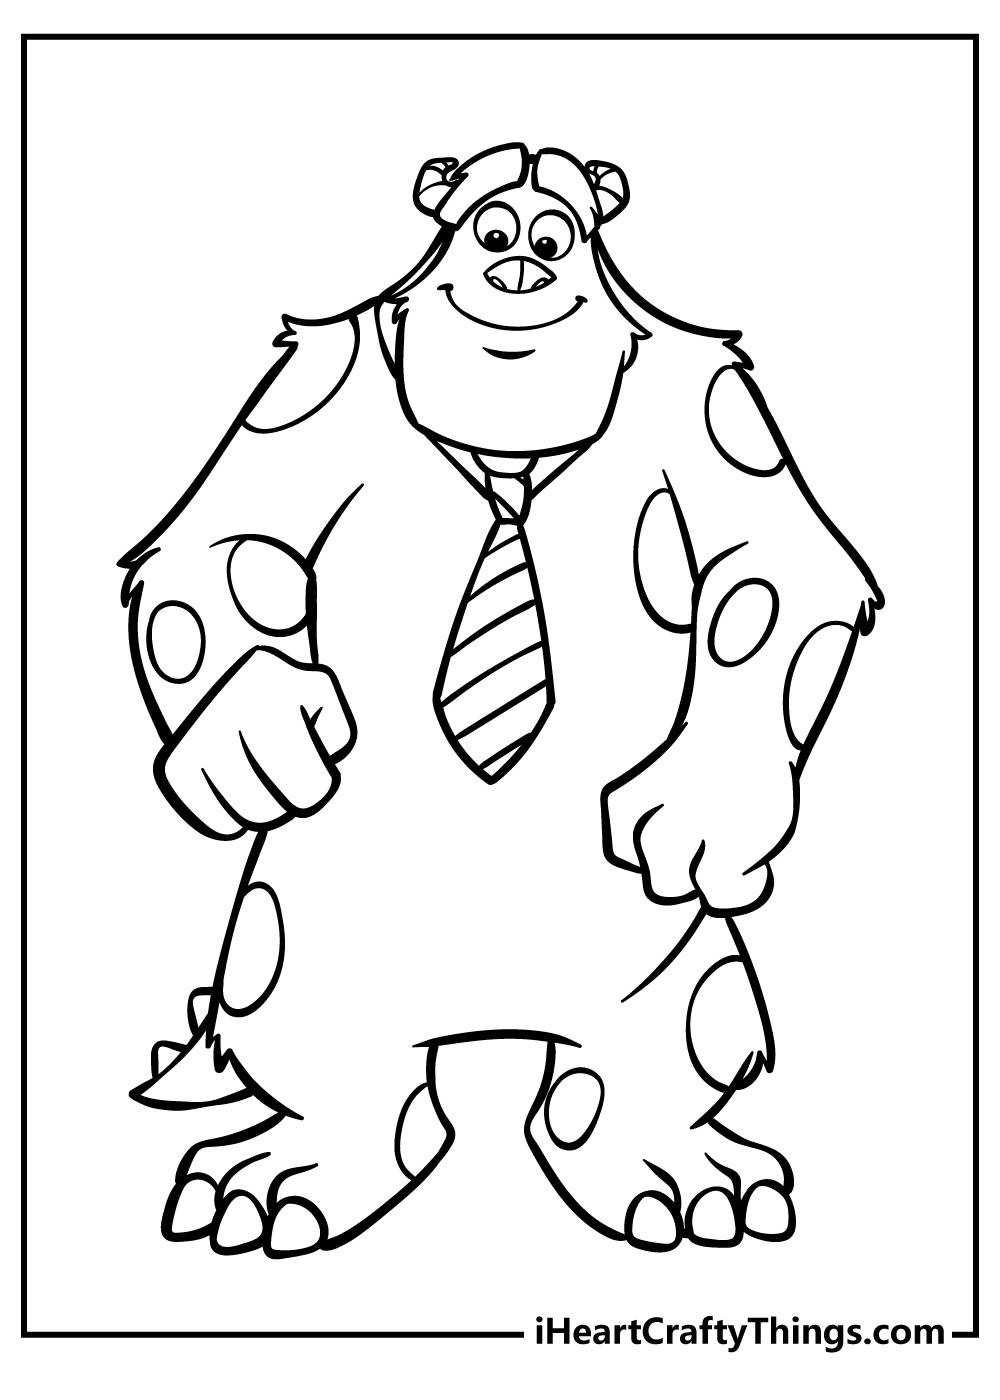 Monsters Inc. Coloring Pages for adults free printable